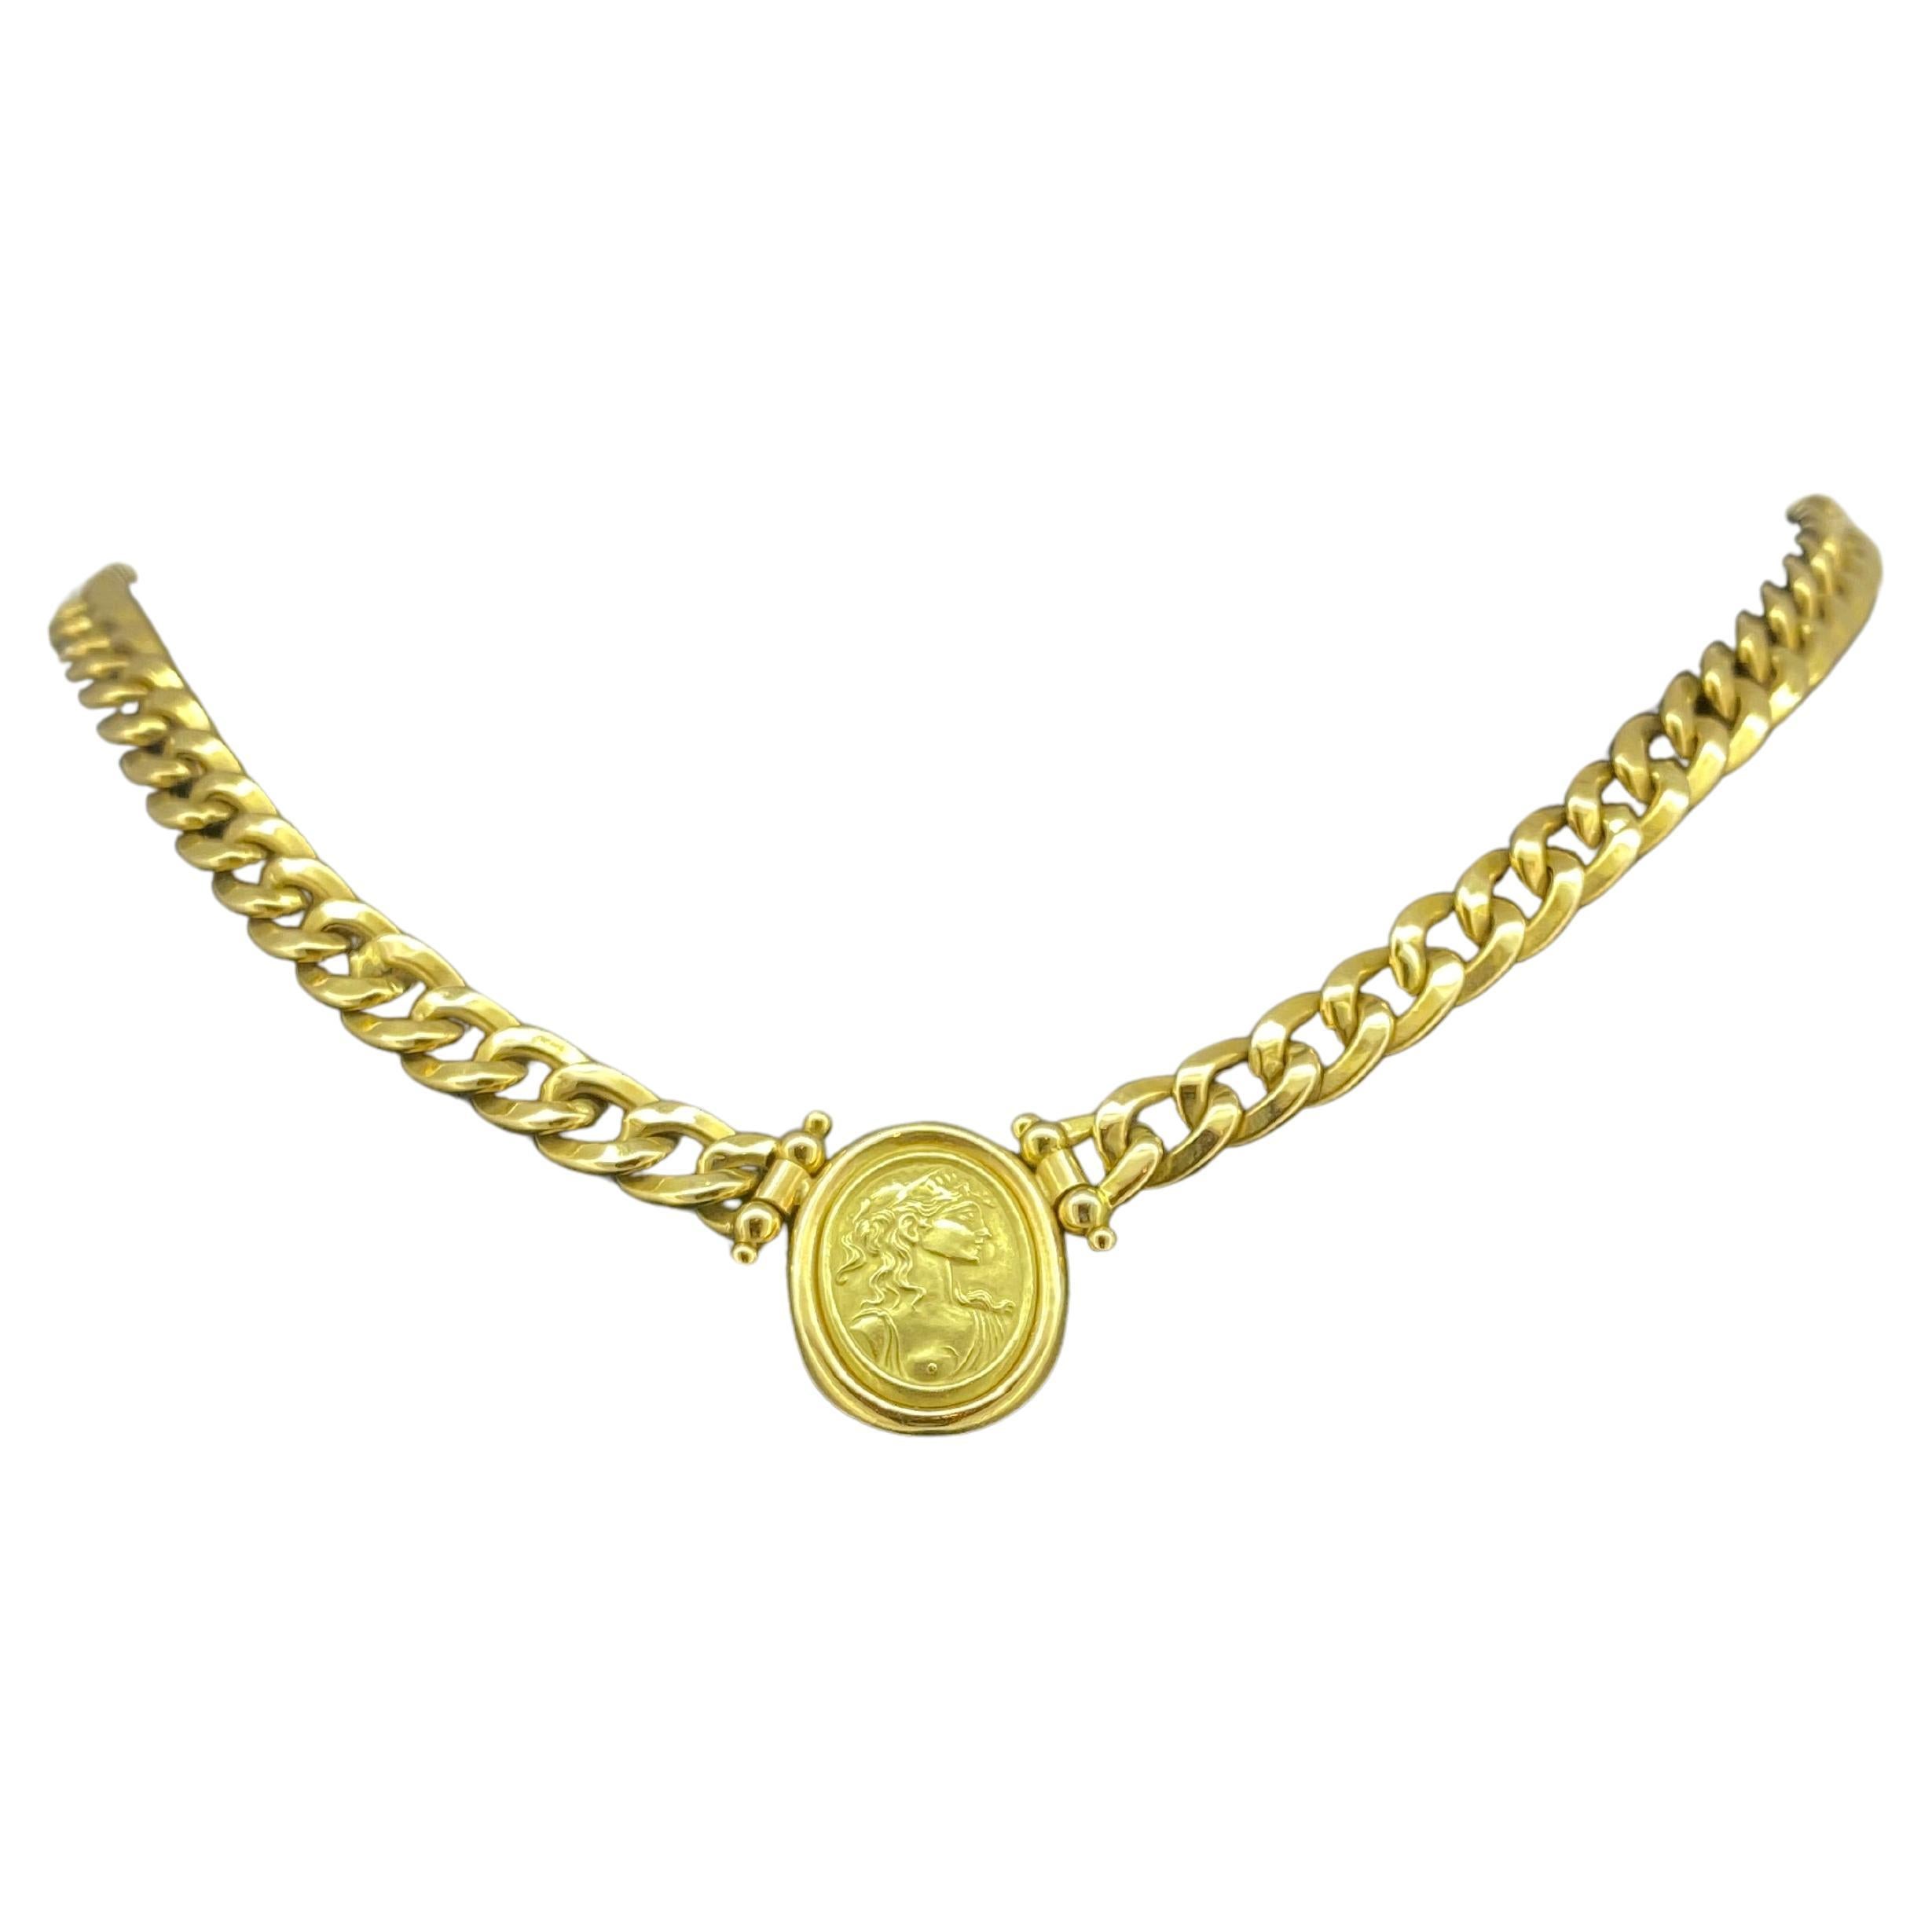 18K Yellow Gold Cameo Pendant Italian Vintage Necklace, Curb Links, 44cm long.